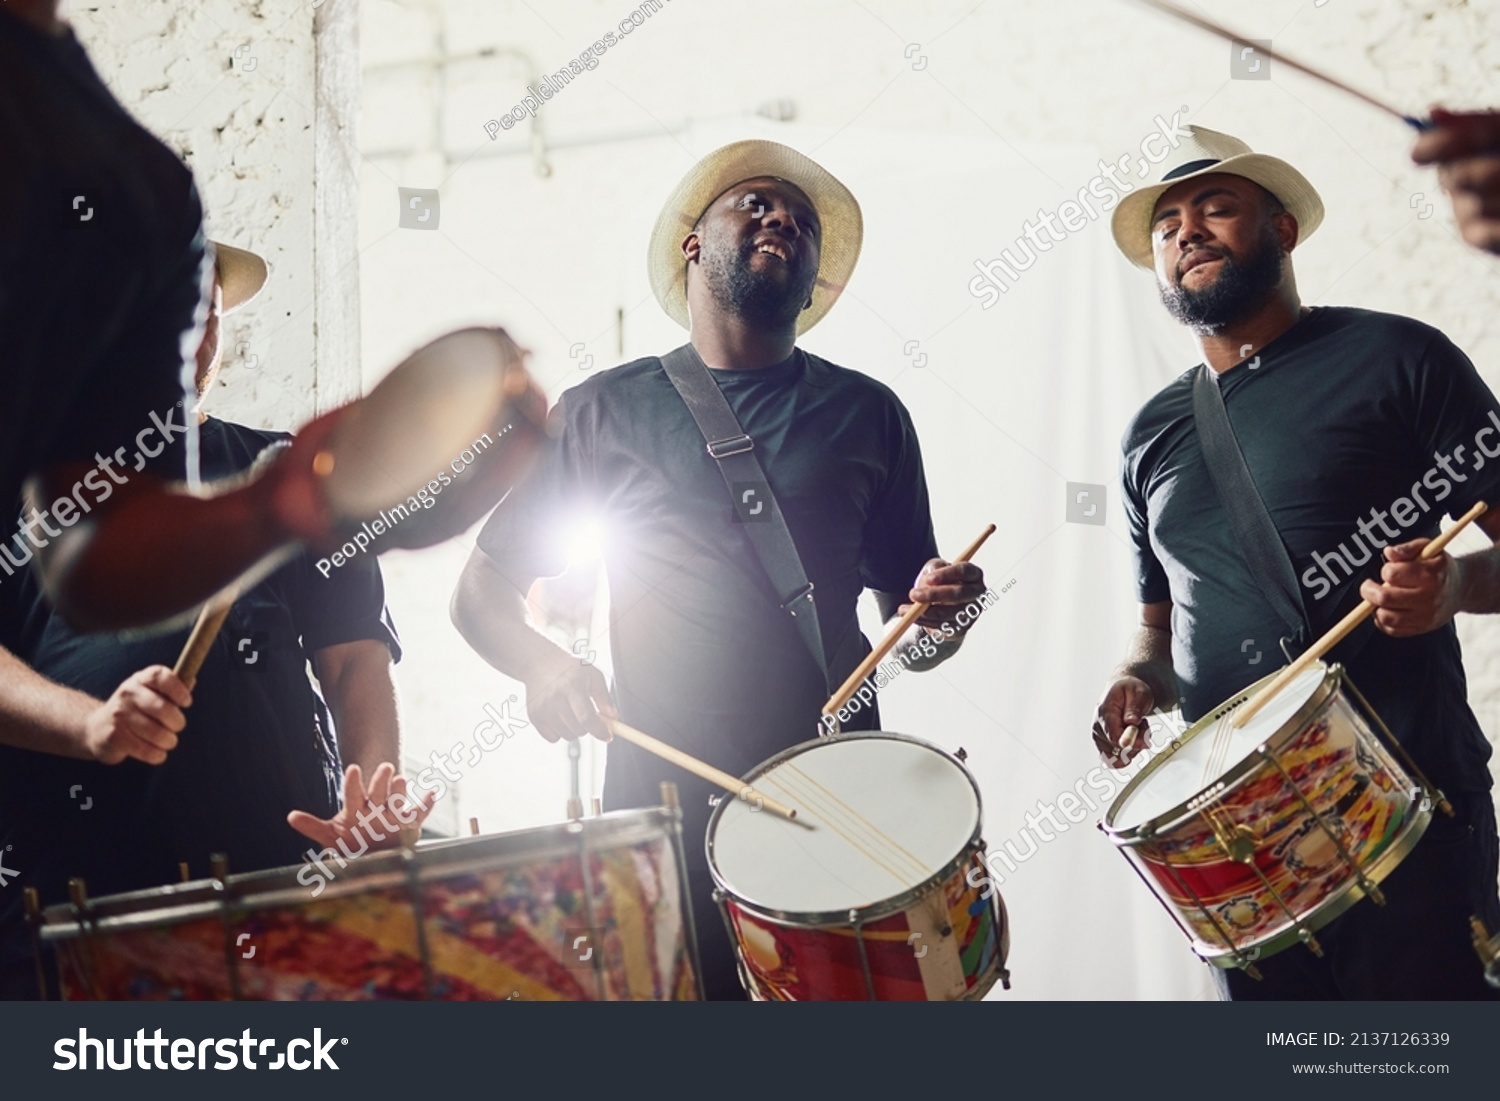 Their beats are on a whole new level. Shot of a group of musical performers playing drums together. #2137126339